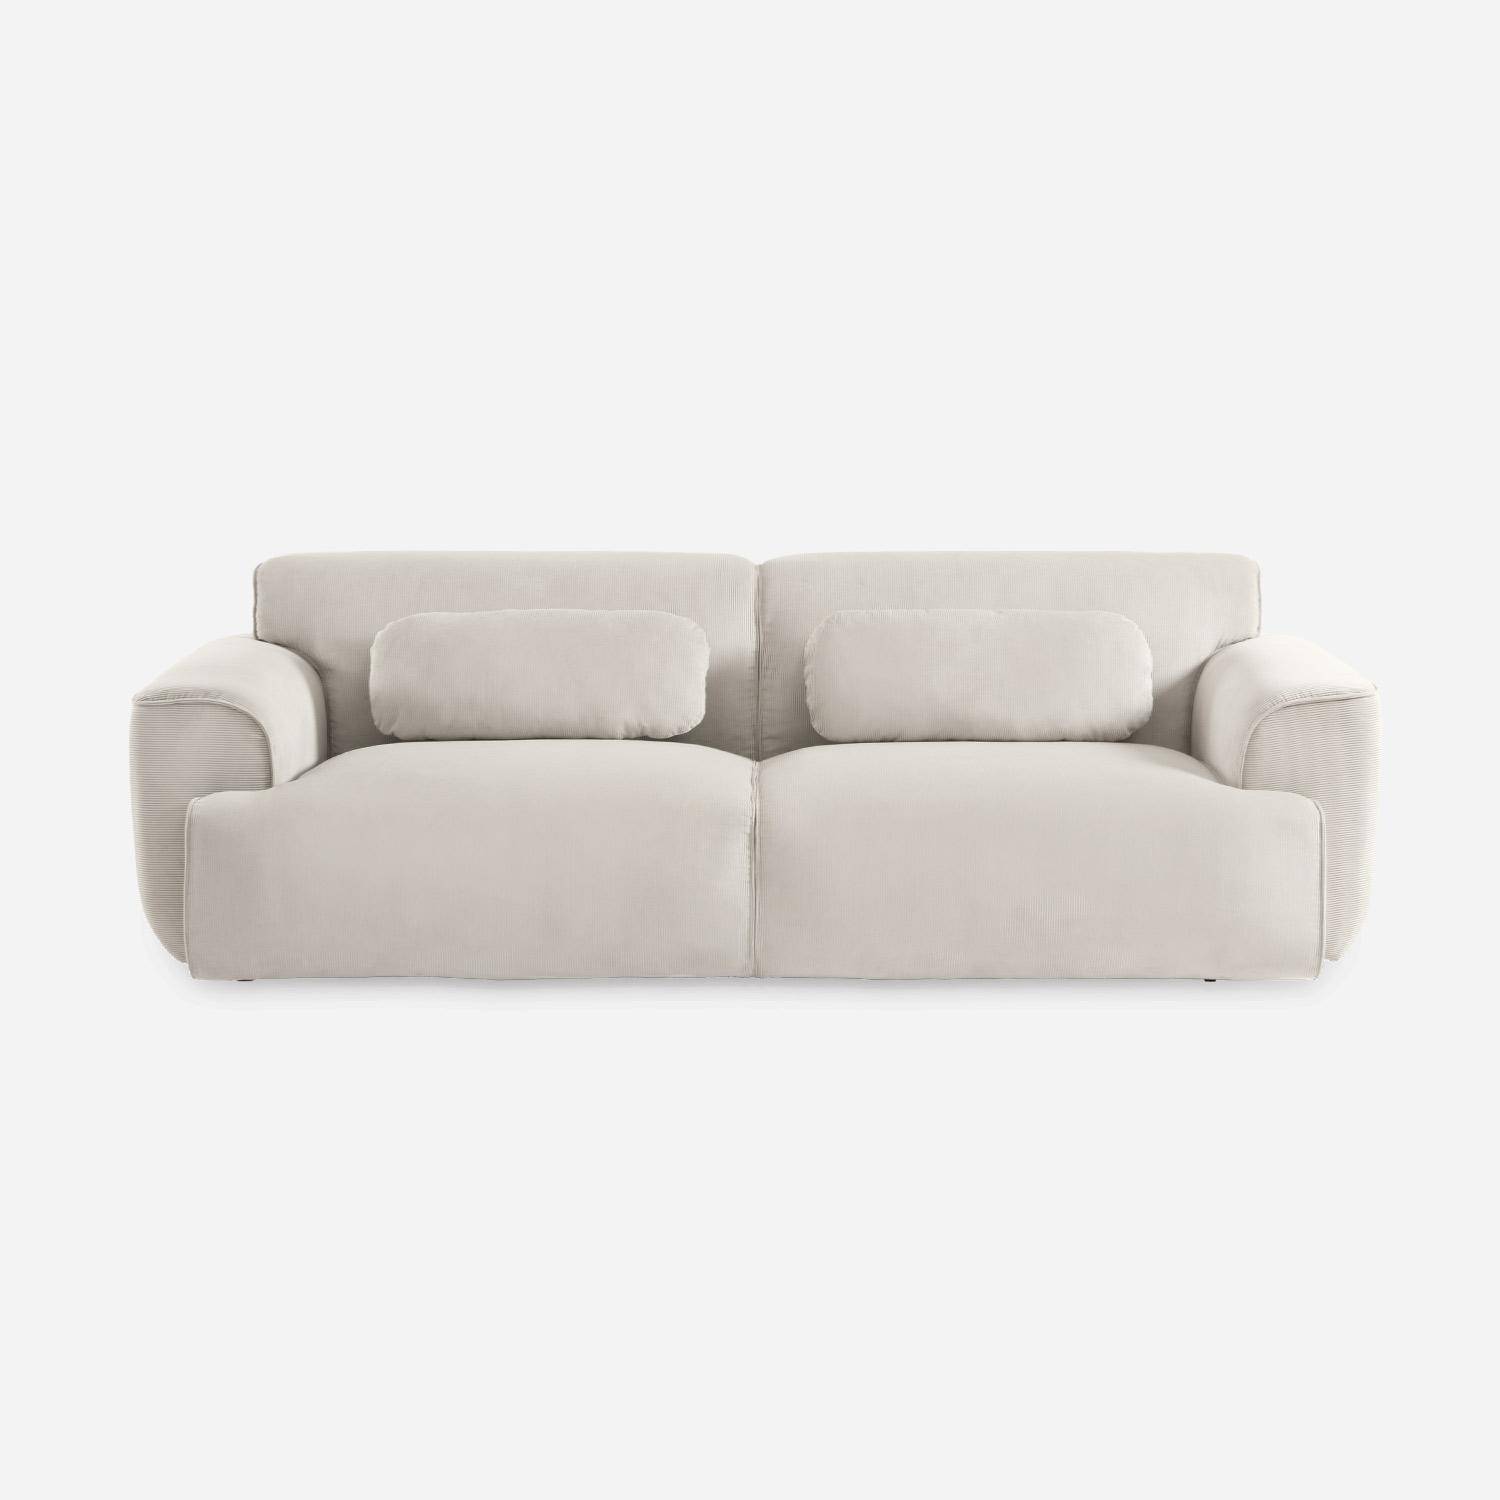  3-Seater corduroy velvet Sofa 230cm, deep seat, cushions provided and removable, beige,sweeek,Photo6